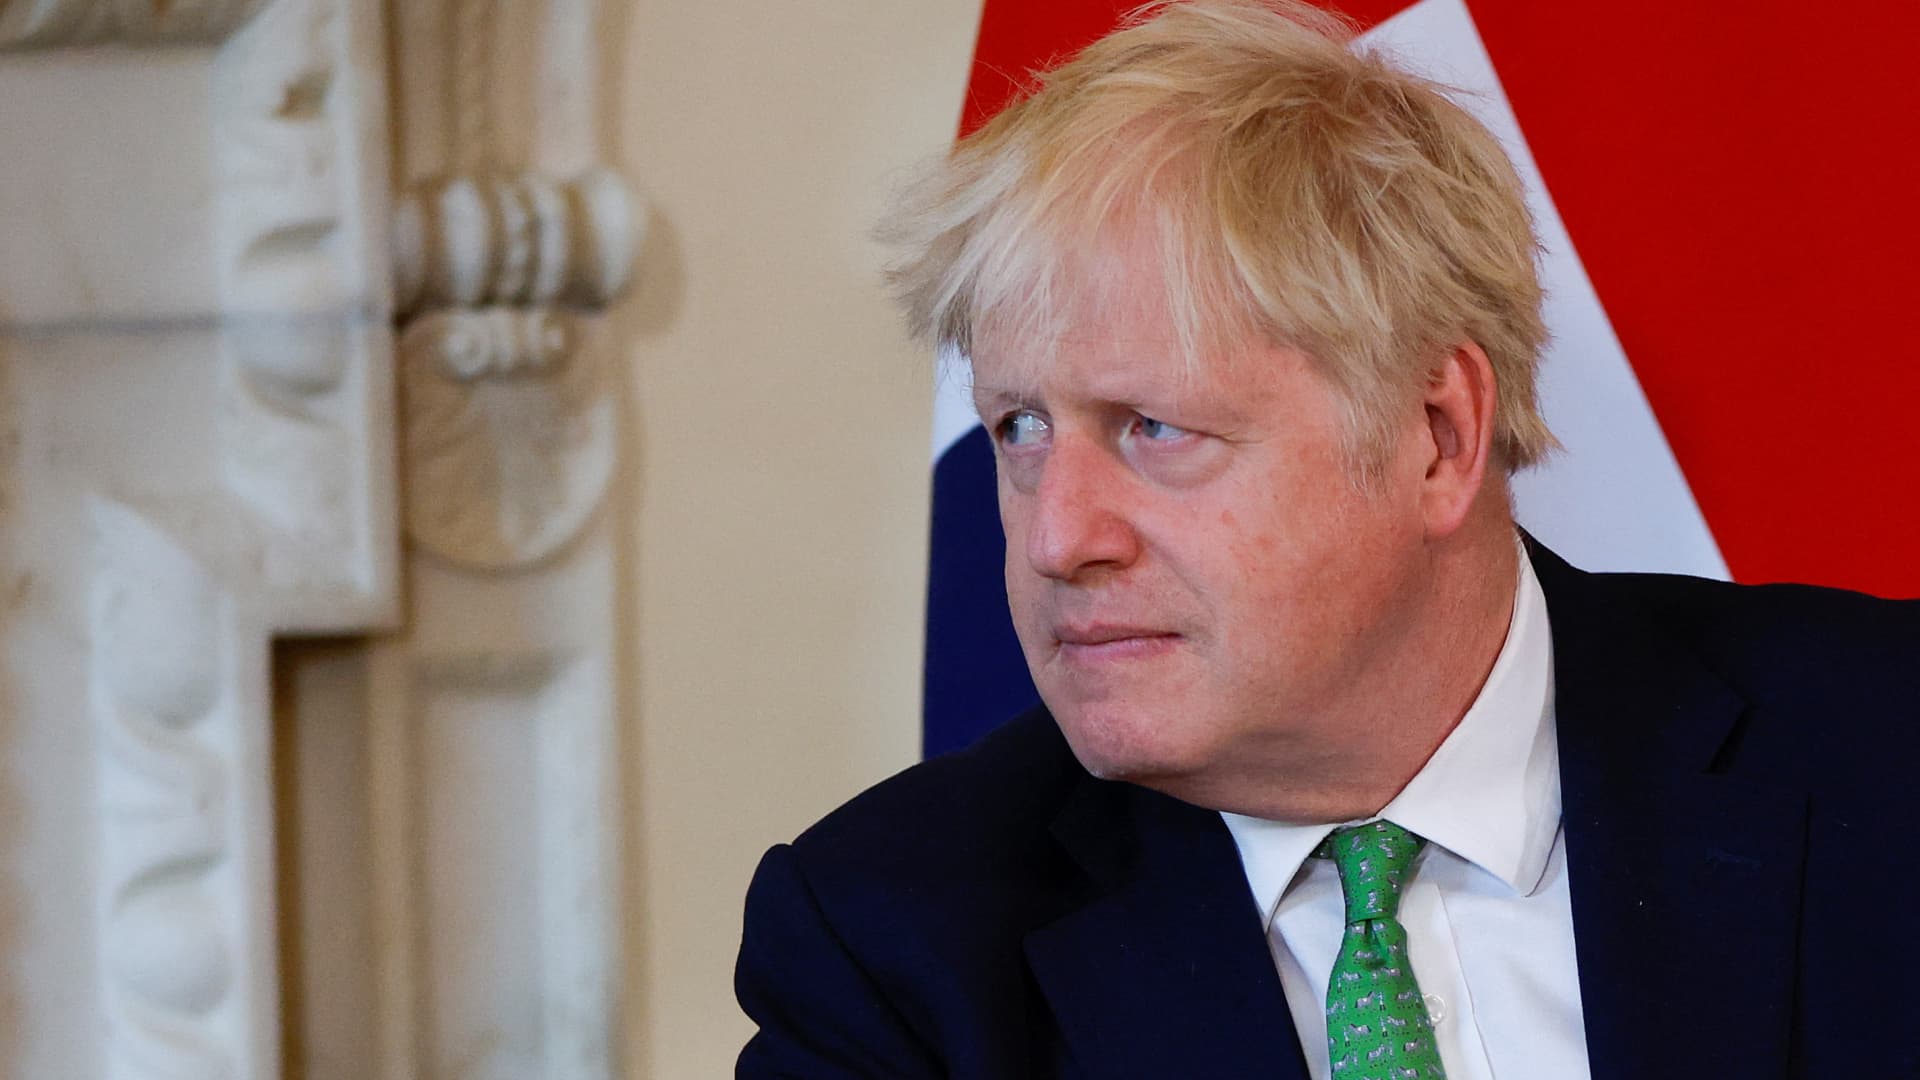 UK’s Boris Johnson fights for his political survival after top resignations and scandals